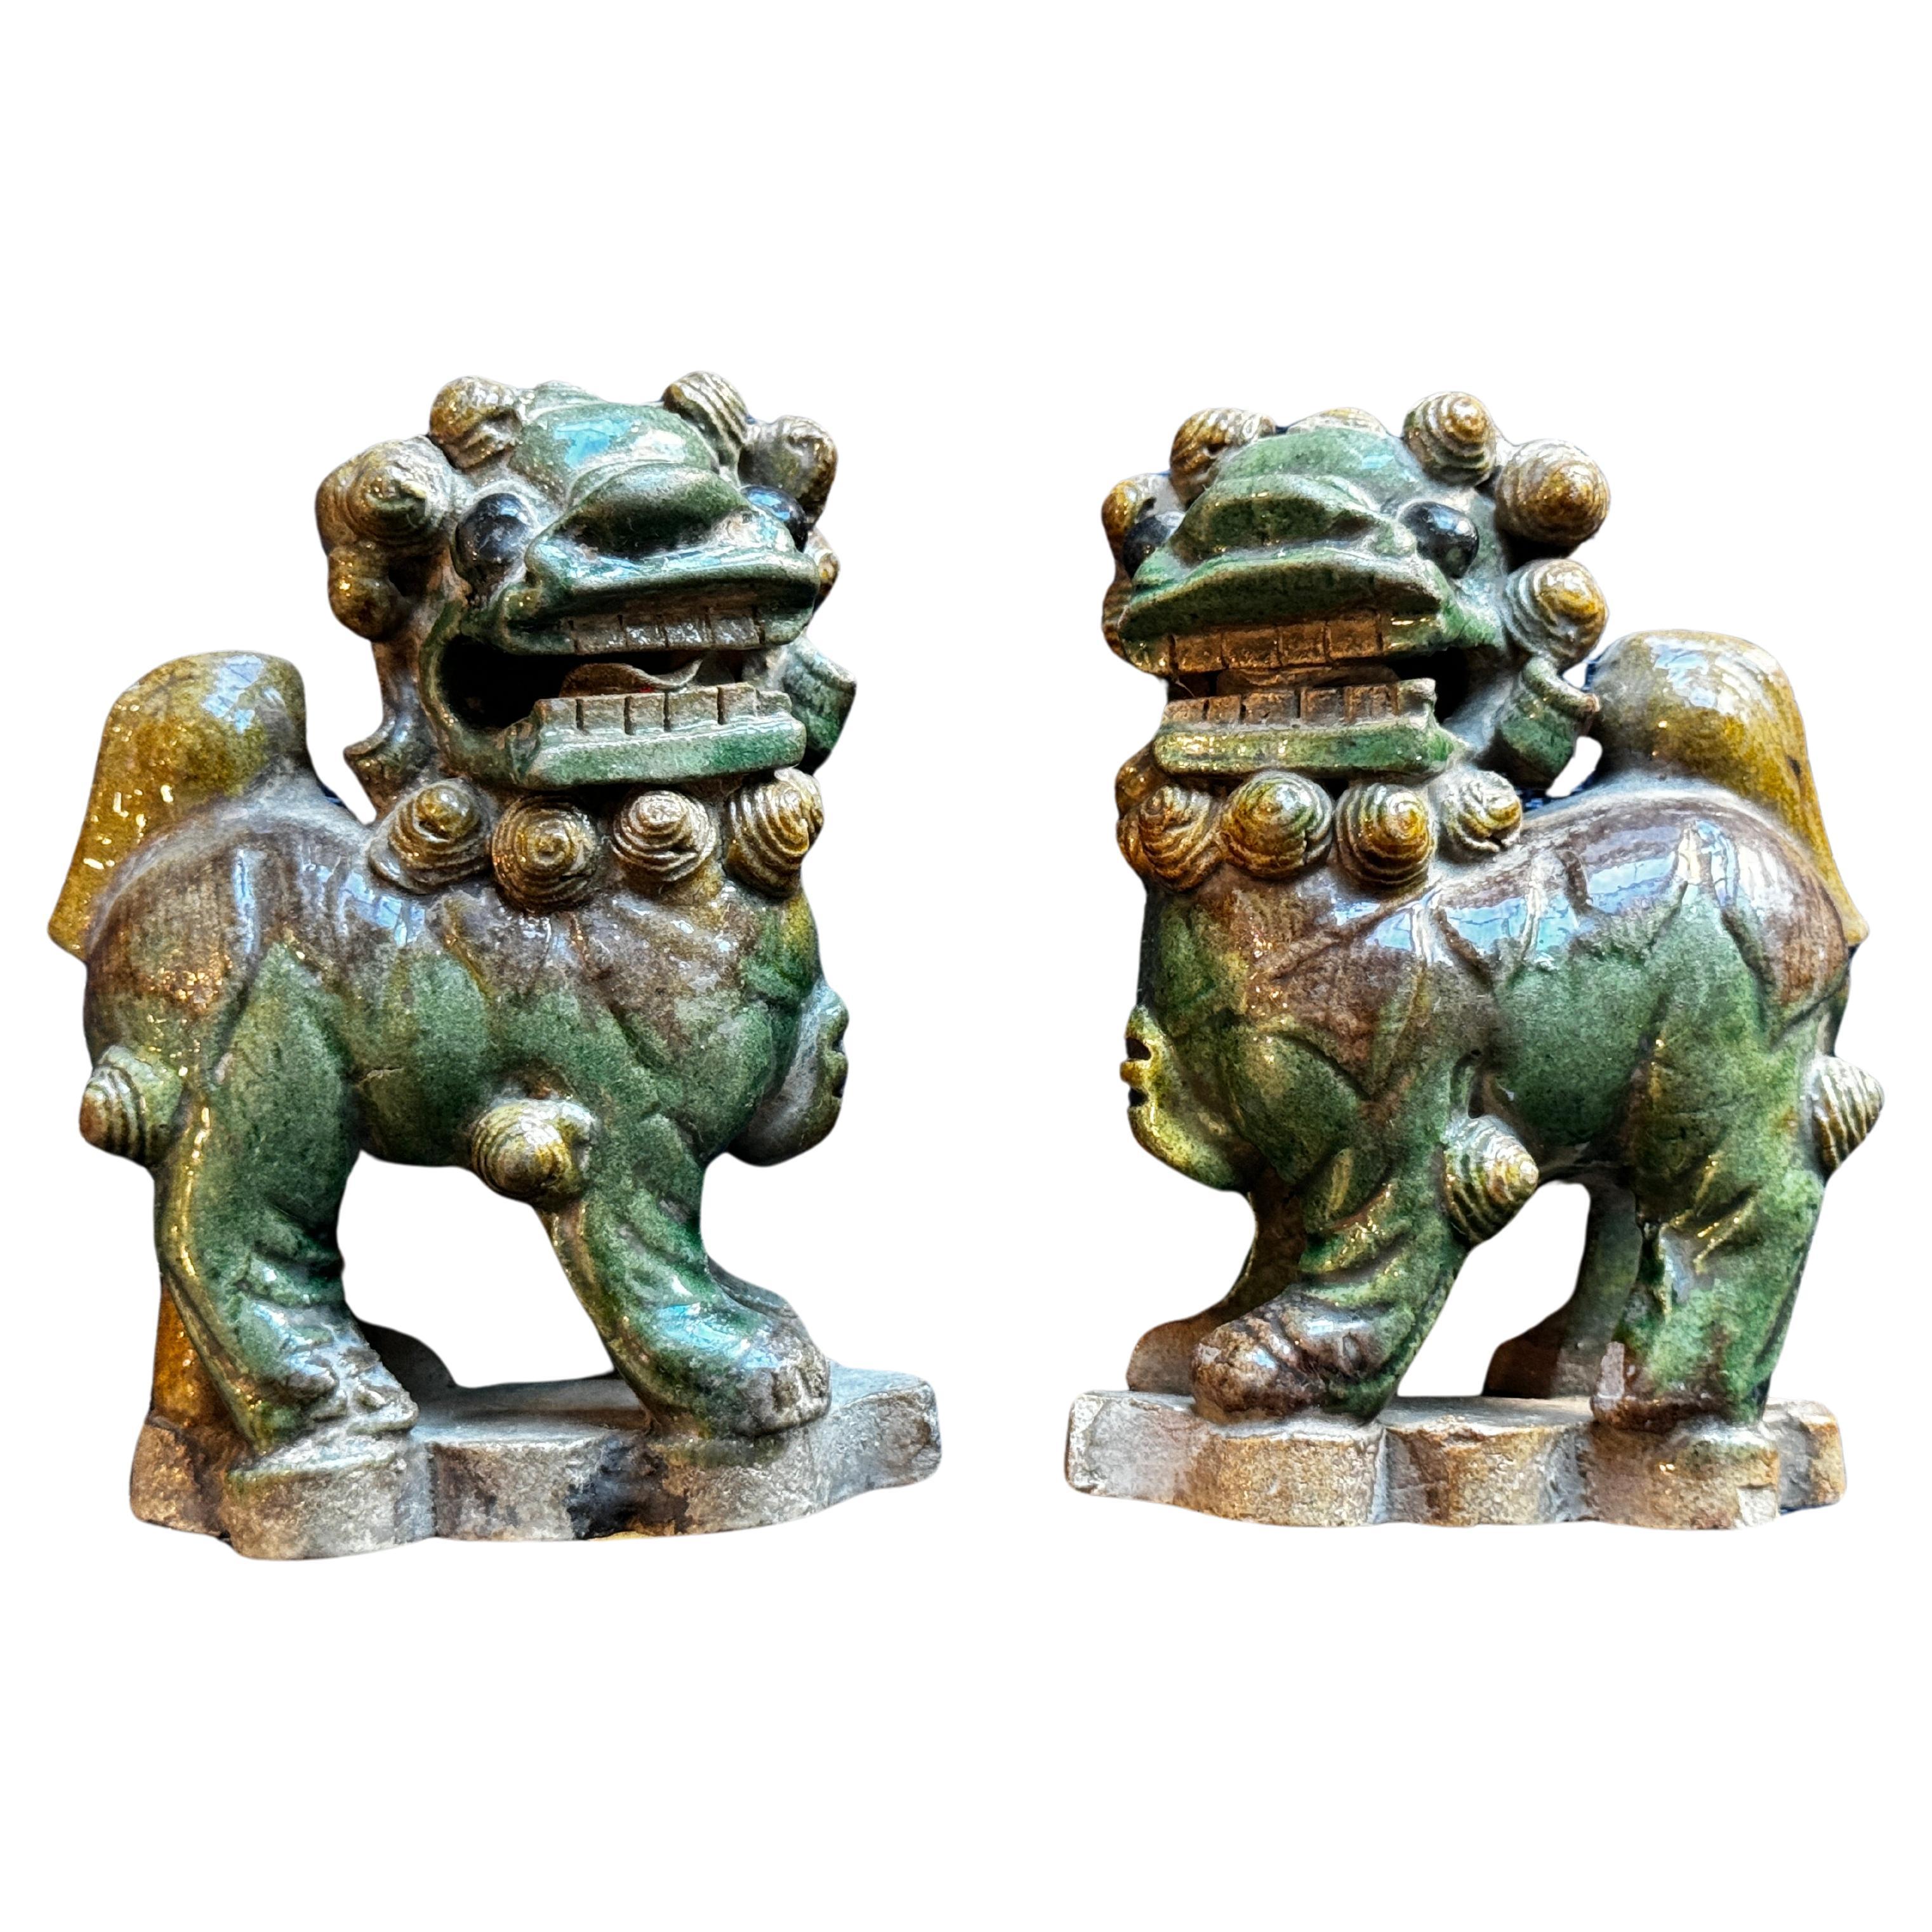 Pair of 19th Century Miniature Foo Dogs  3.25" x 2" x 4.5" For Sale